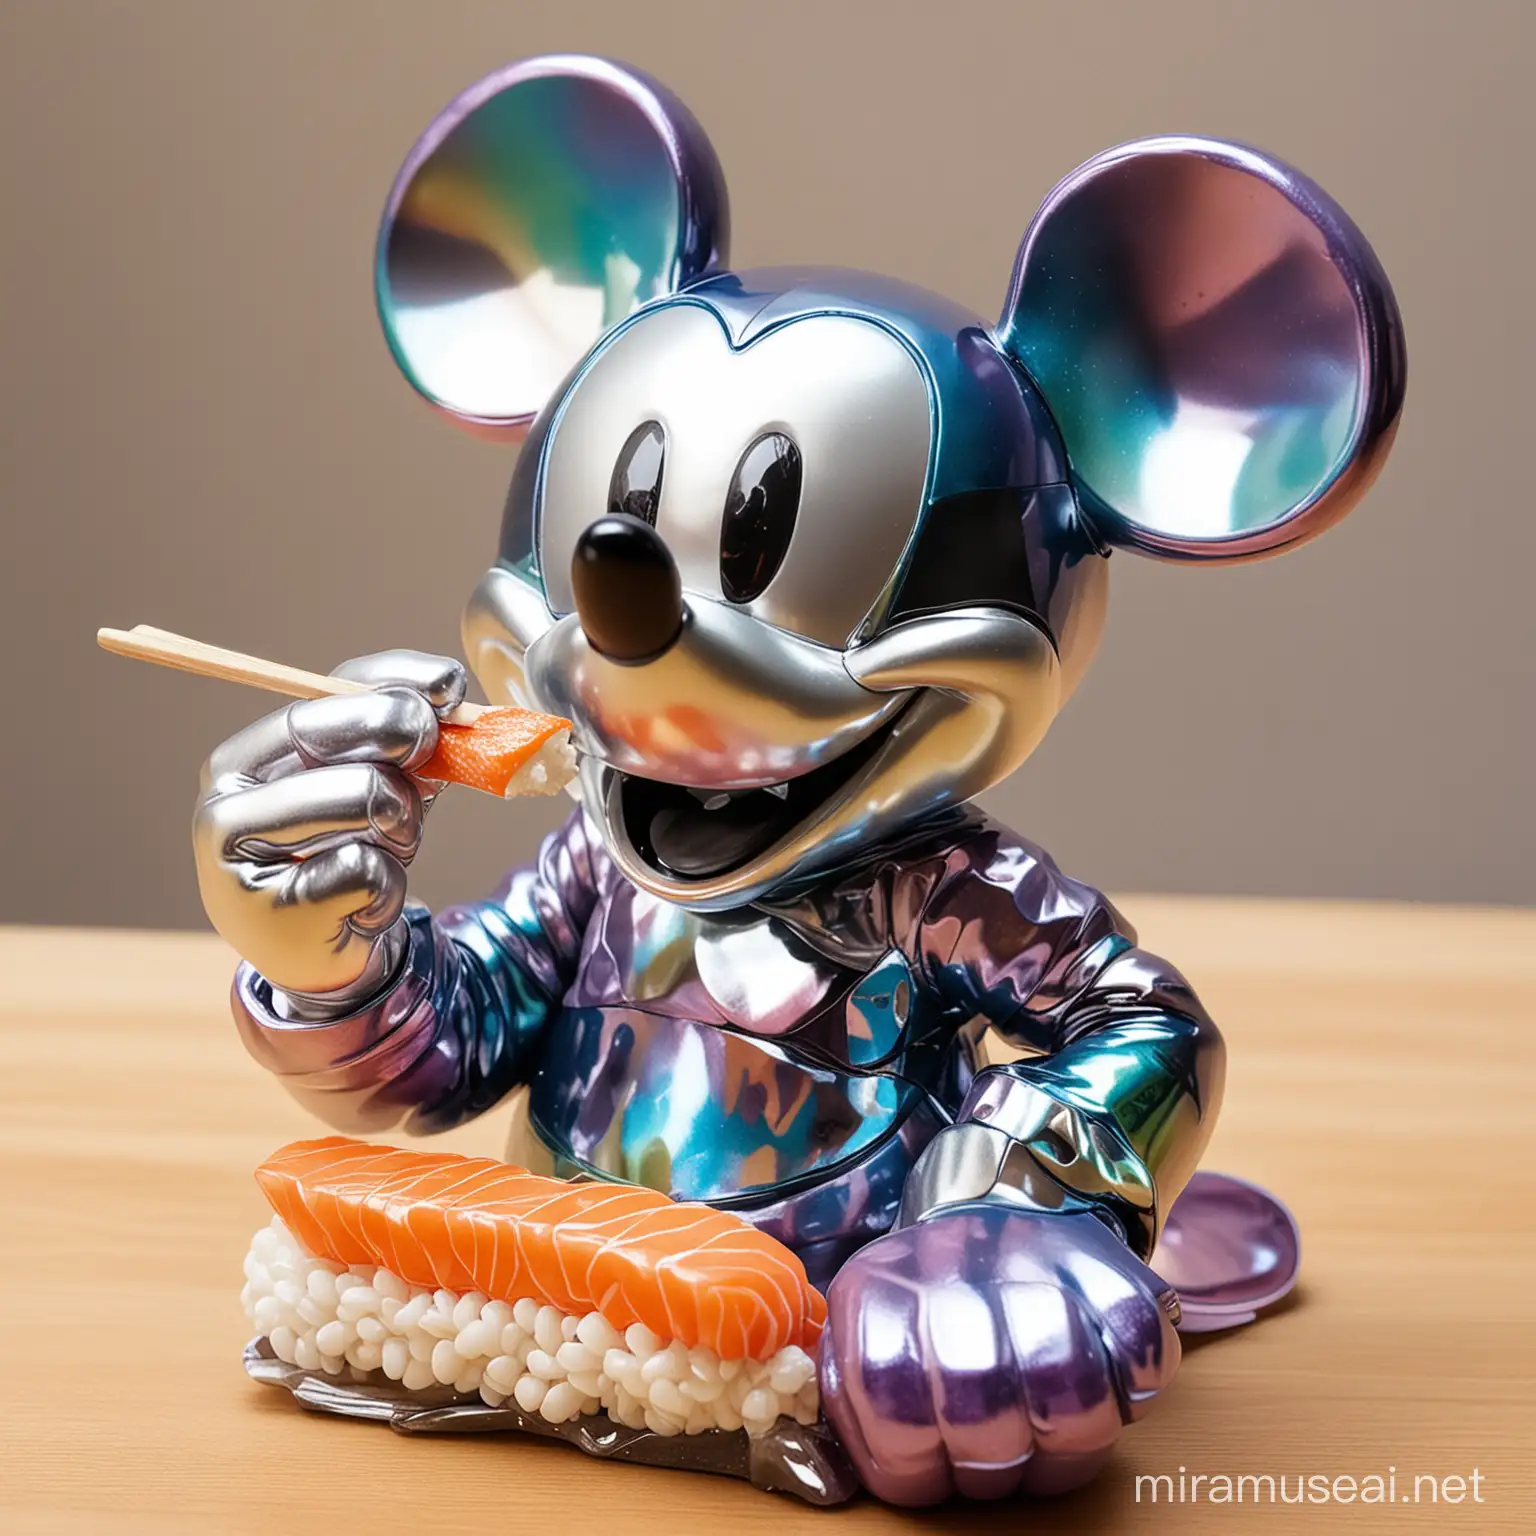 Produce a picture of a shiny strong iridescent Mickey mouse sculpture eating Sushi 